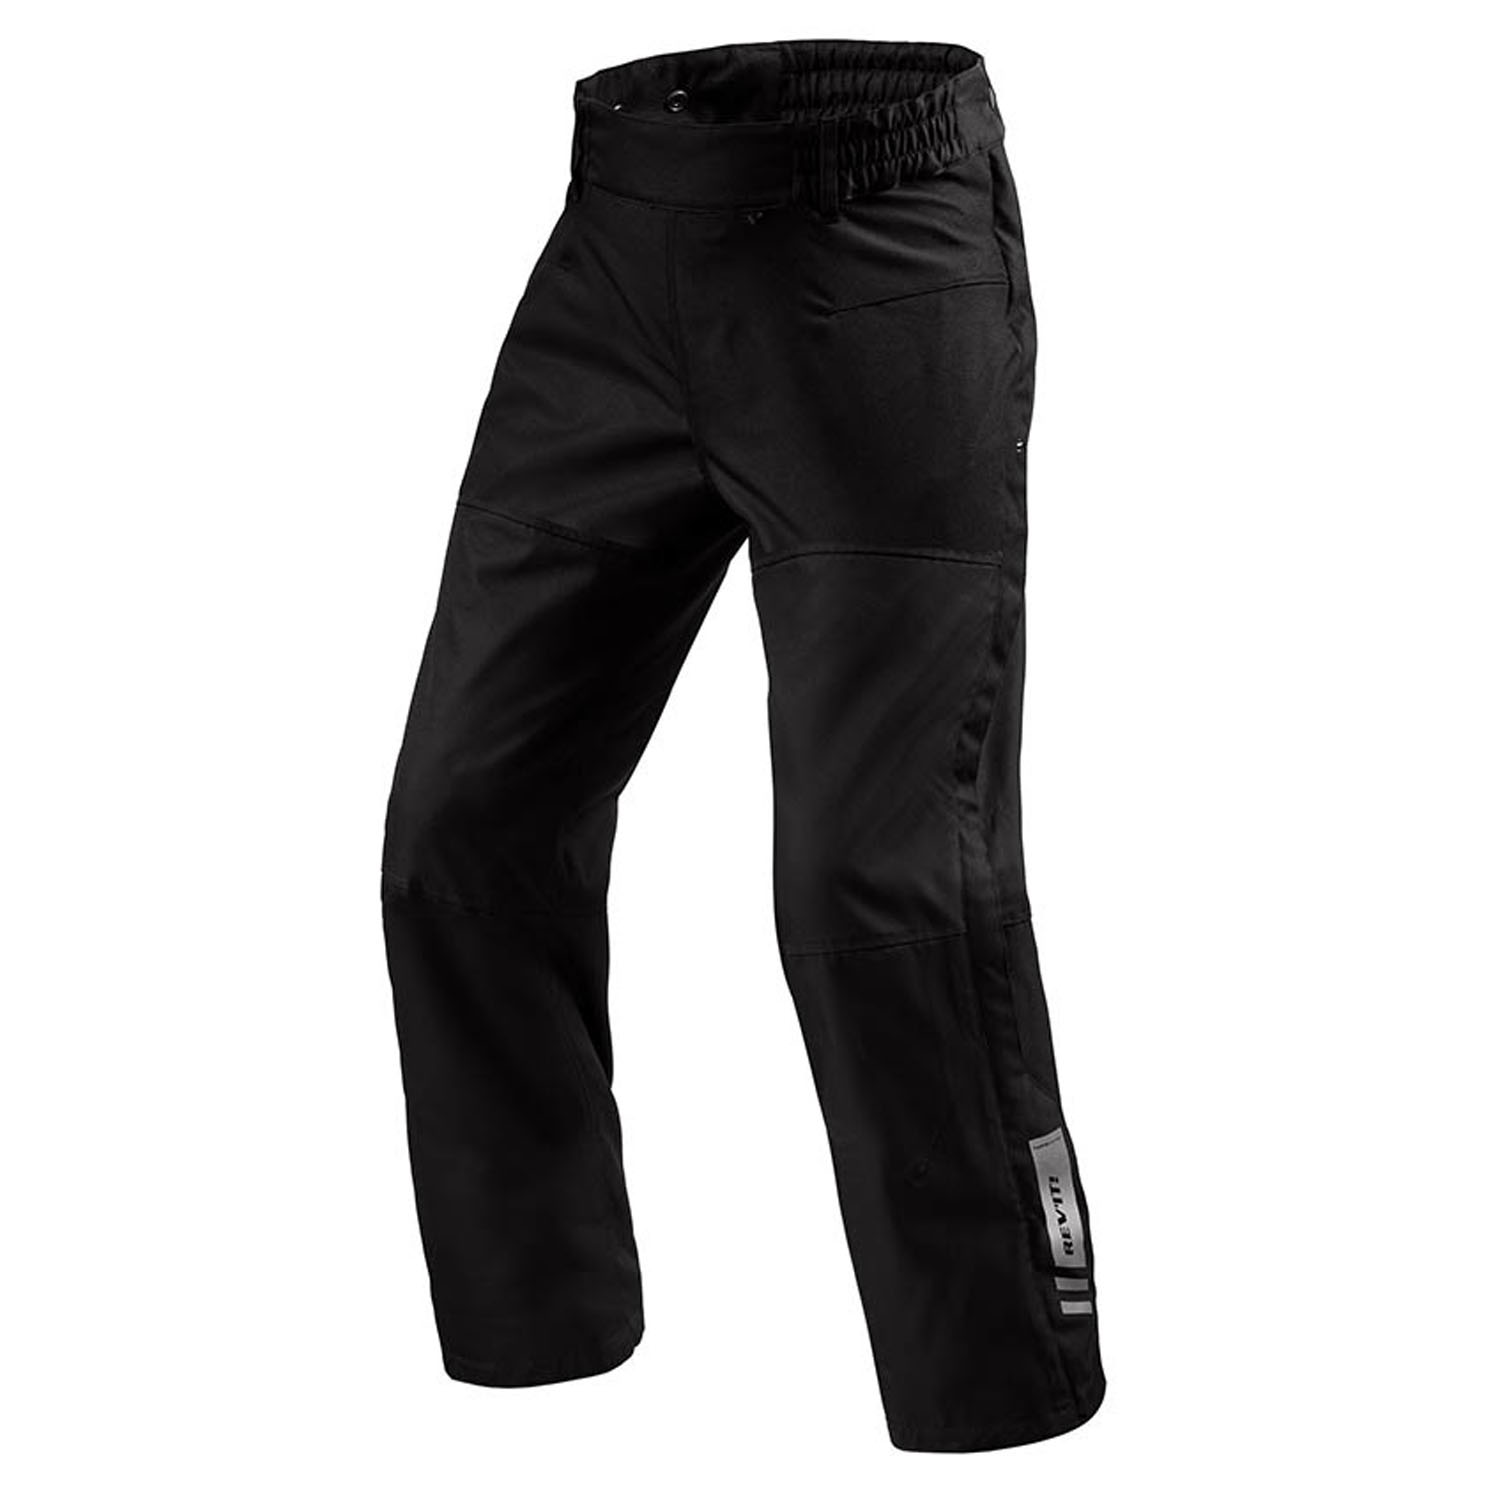 Image of REV'IT! Pants Axis 2 H2O Black Long Motorcycle Pants Taille 2XL